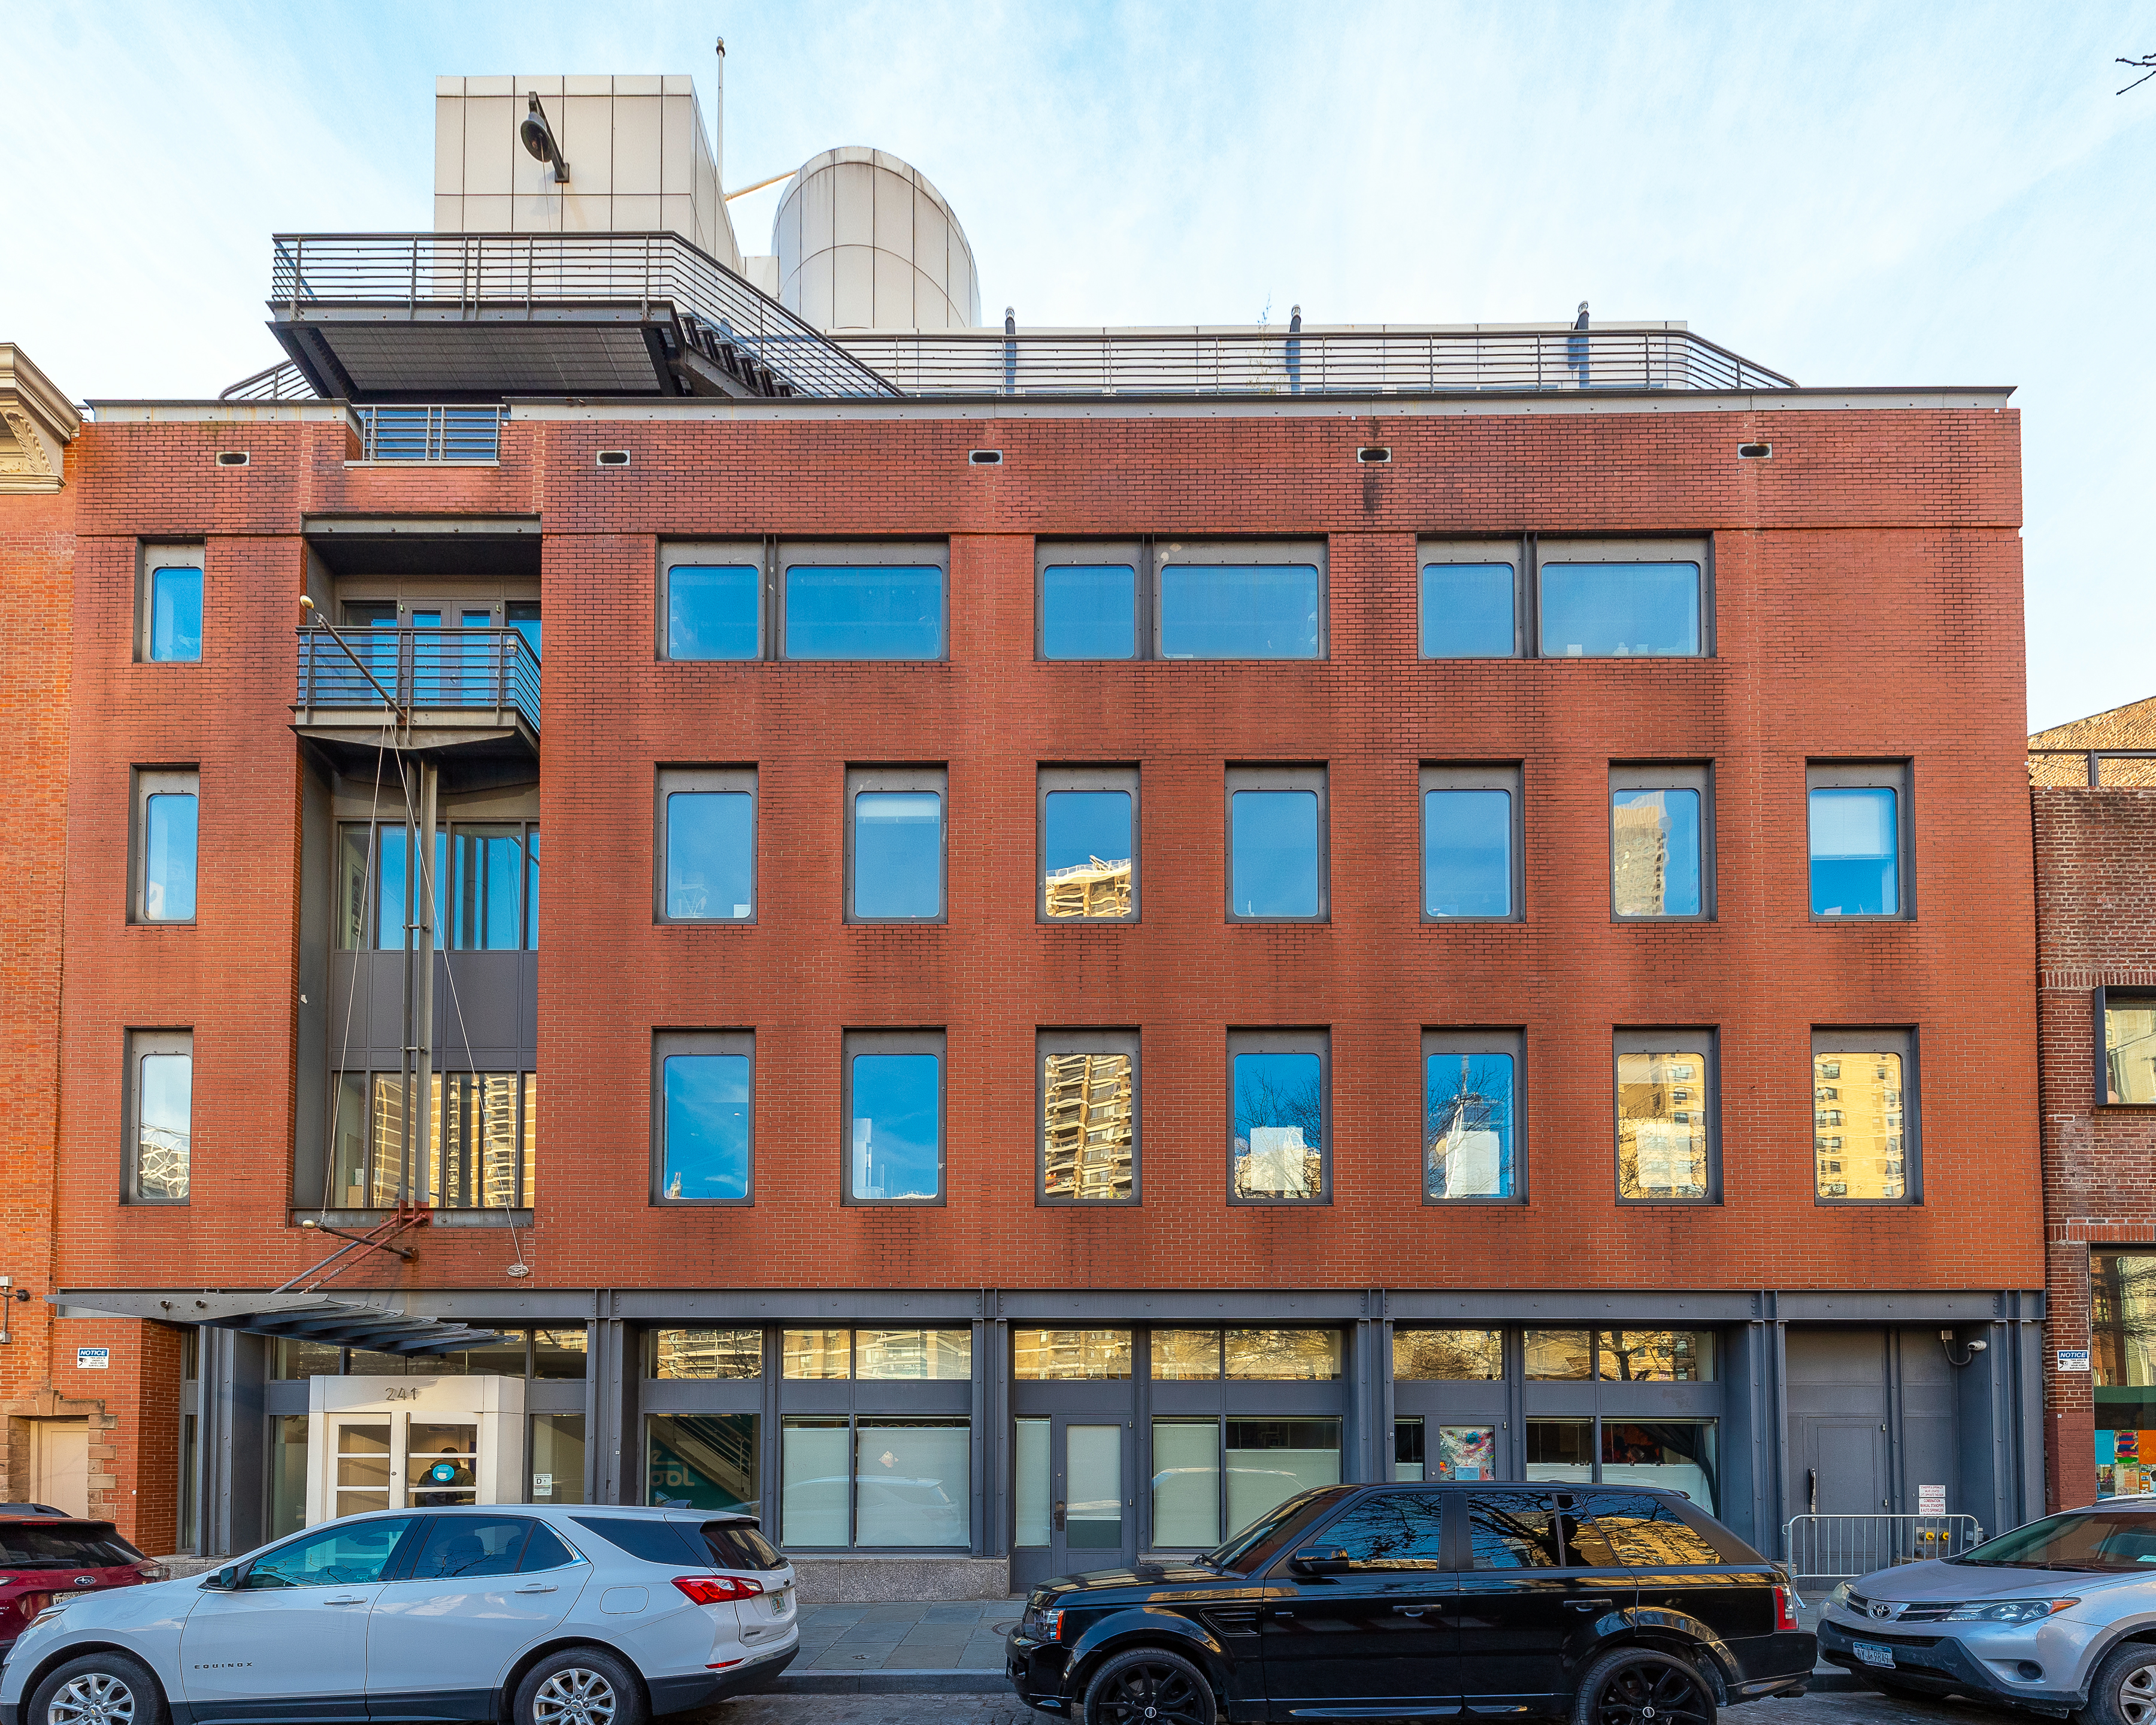 Avison Young brings South Street Seaport’s 241 Water Street to market for $28 million